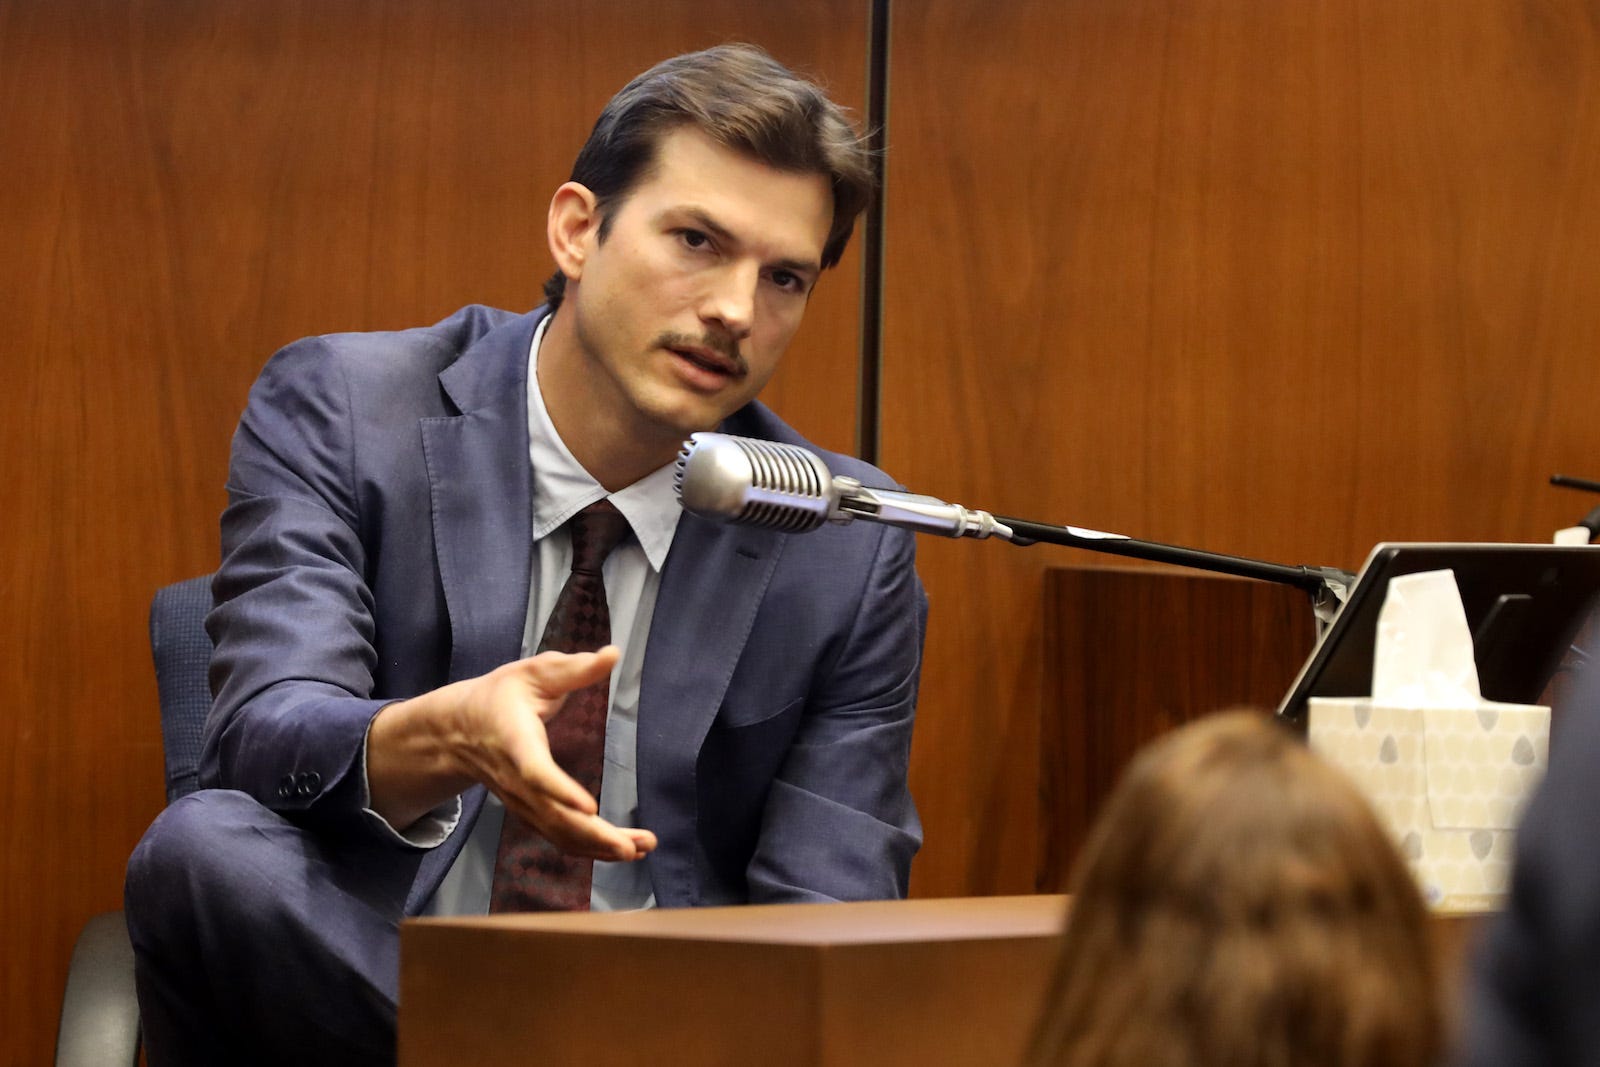 Ashton Kutcher testifies during the trial of alleged serial killer Michael Gargiulo, known as the “Hollywood Ripper,” at the Clara Shortridge Foltz Criminal Justice Center on May 29, 2019 in Los Angeles, California. Gargiulo is facing murder charges, including the February 21, 2001 stabbing death of Kutcher’s friend Ashley Ellerin. (Photo by Frederick M. Brown/Getty Images)